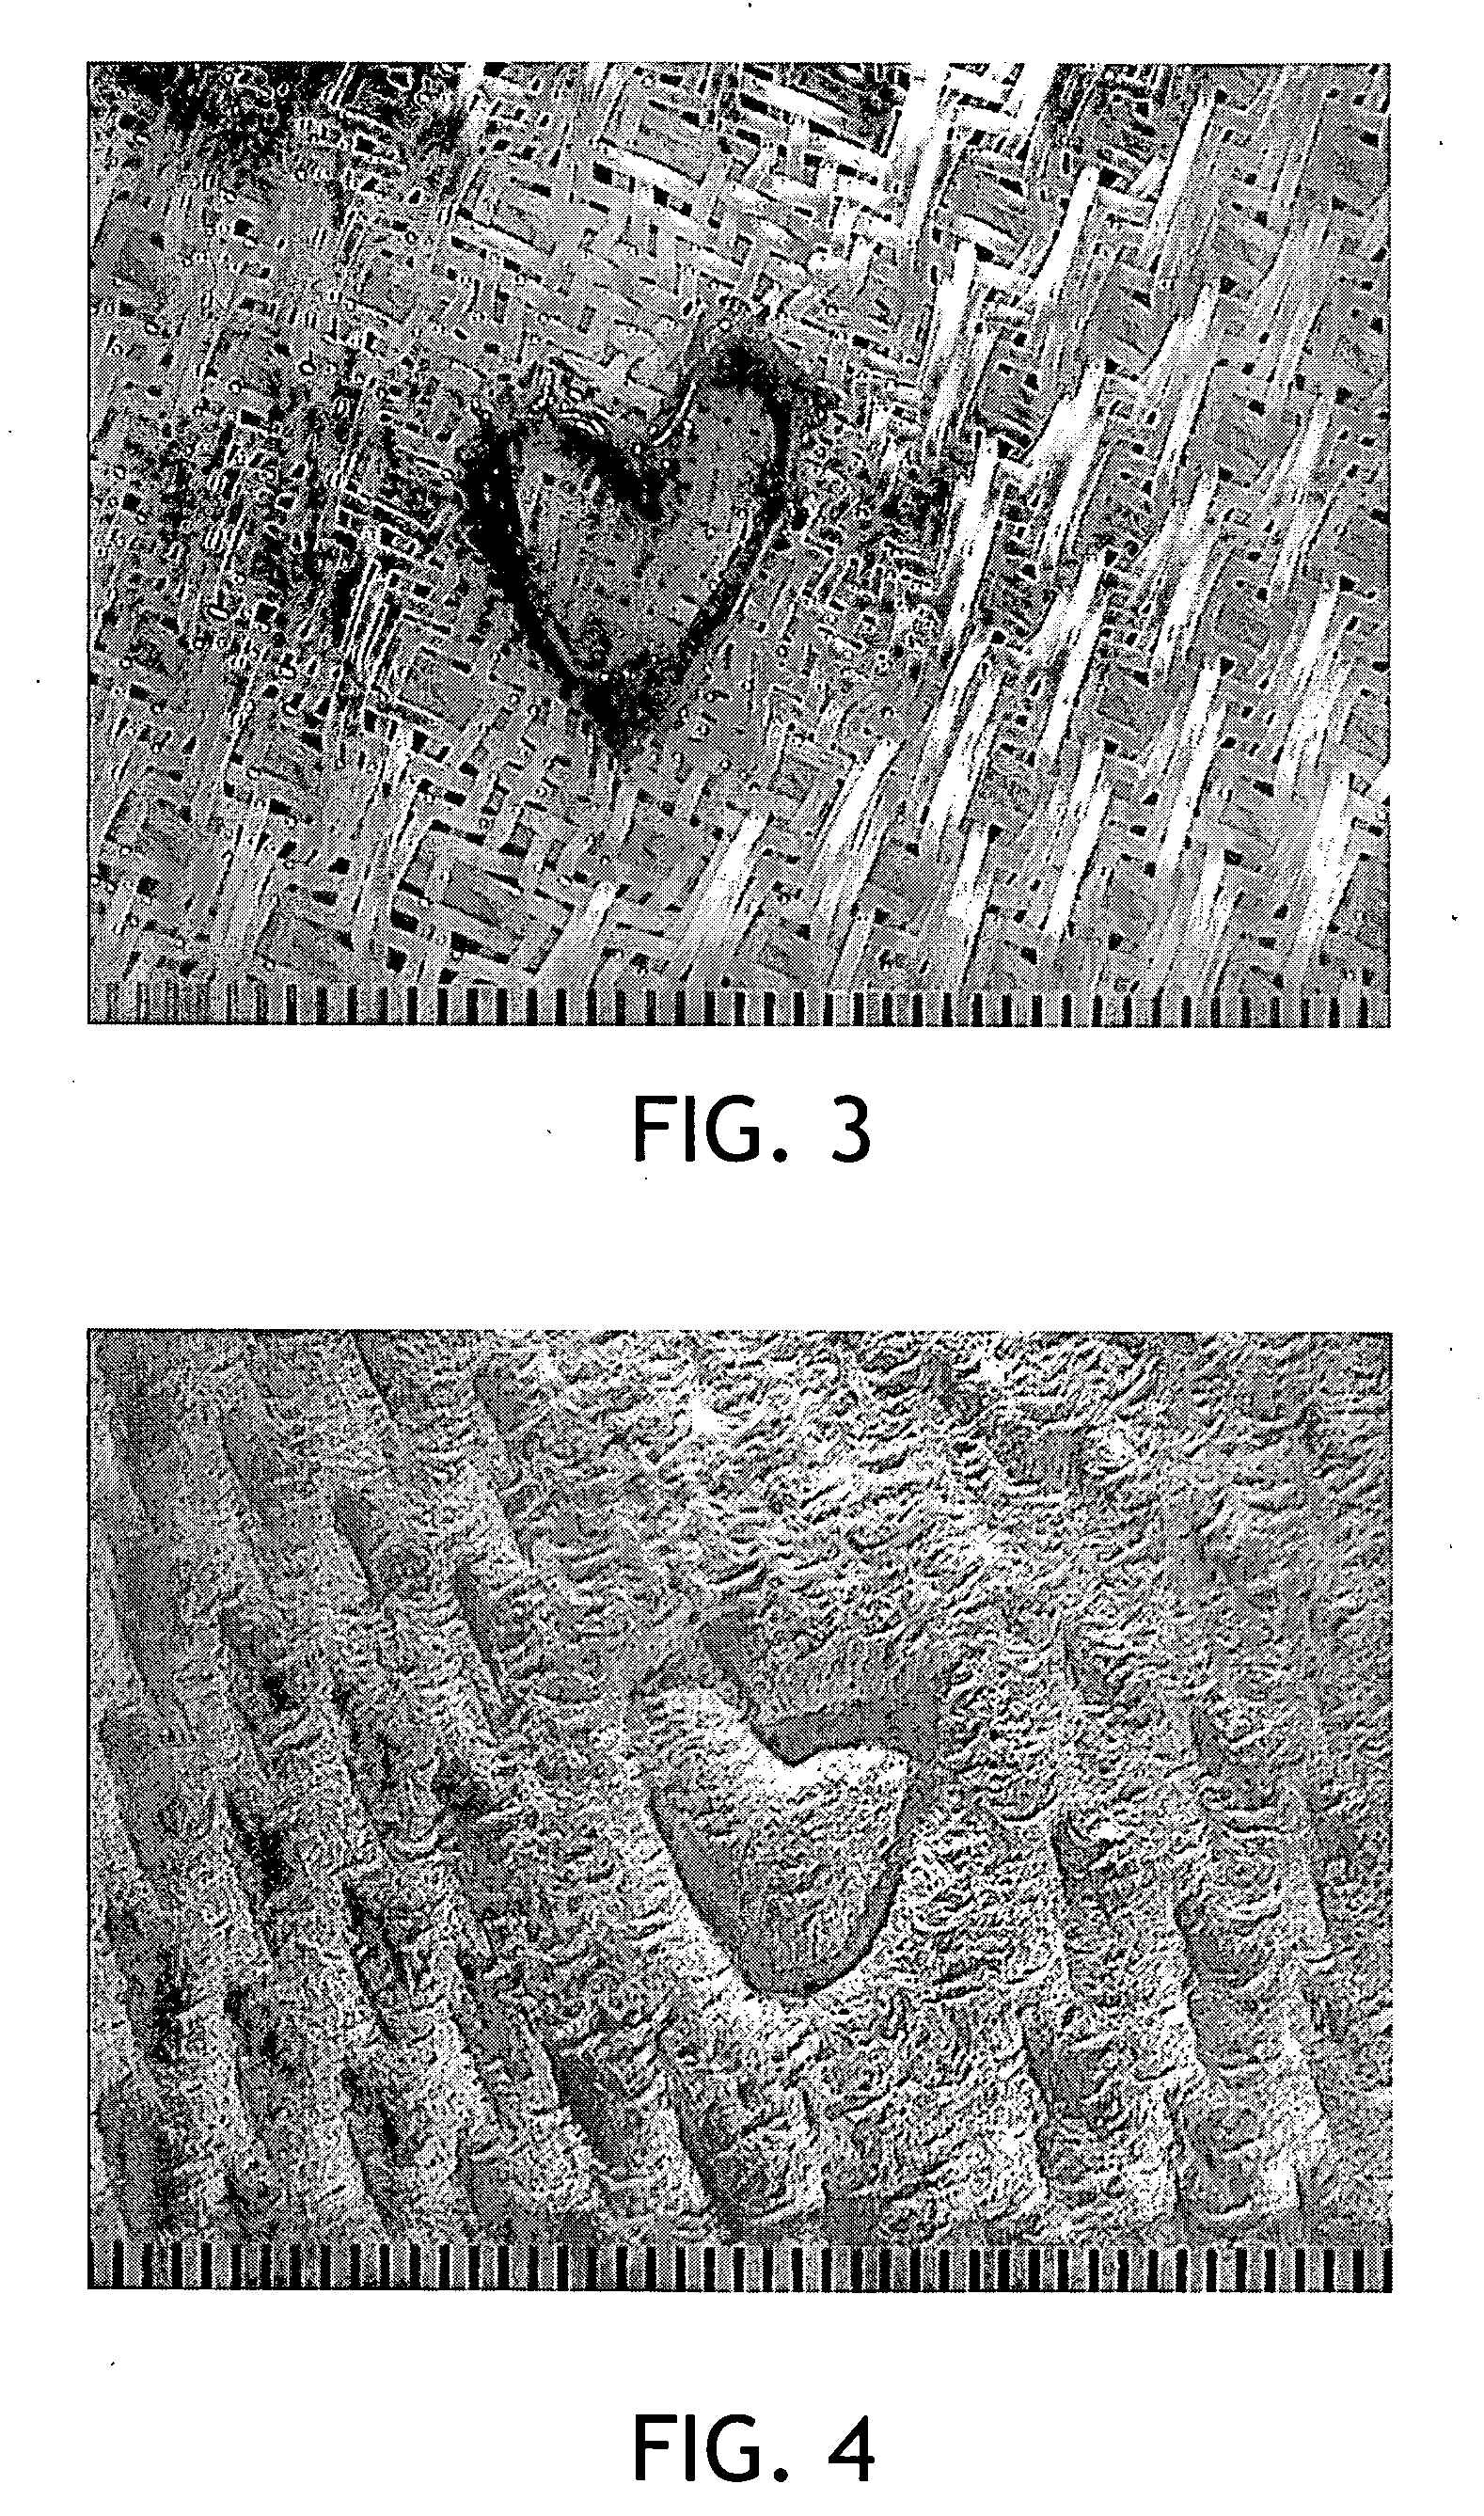 Method of making tissue sheets with textured woven fabrics having highlighted design elements